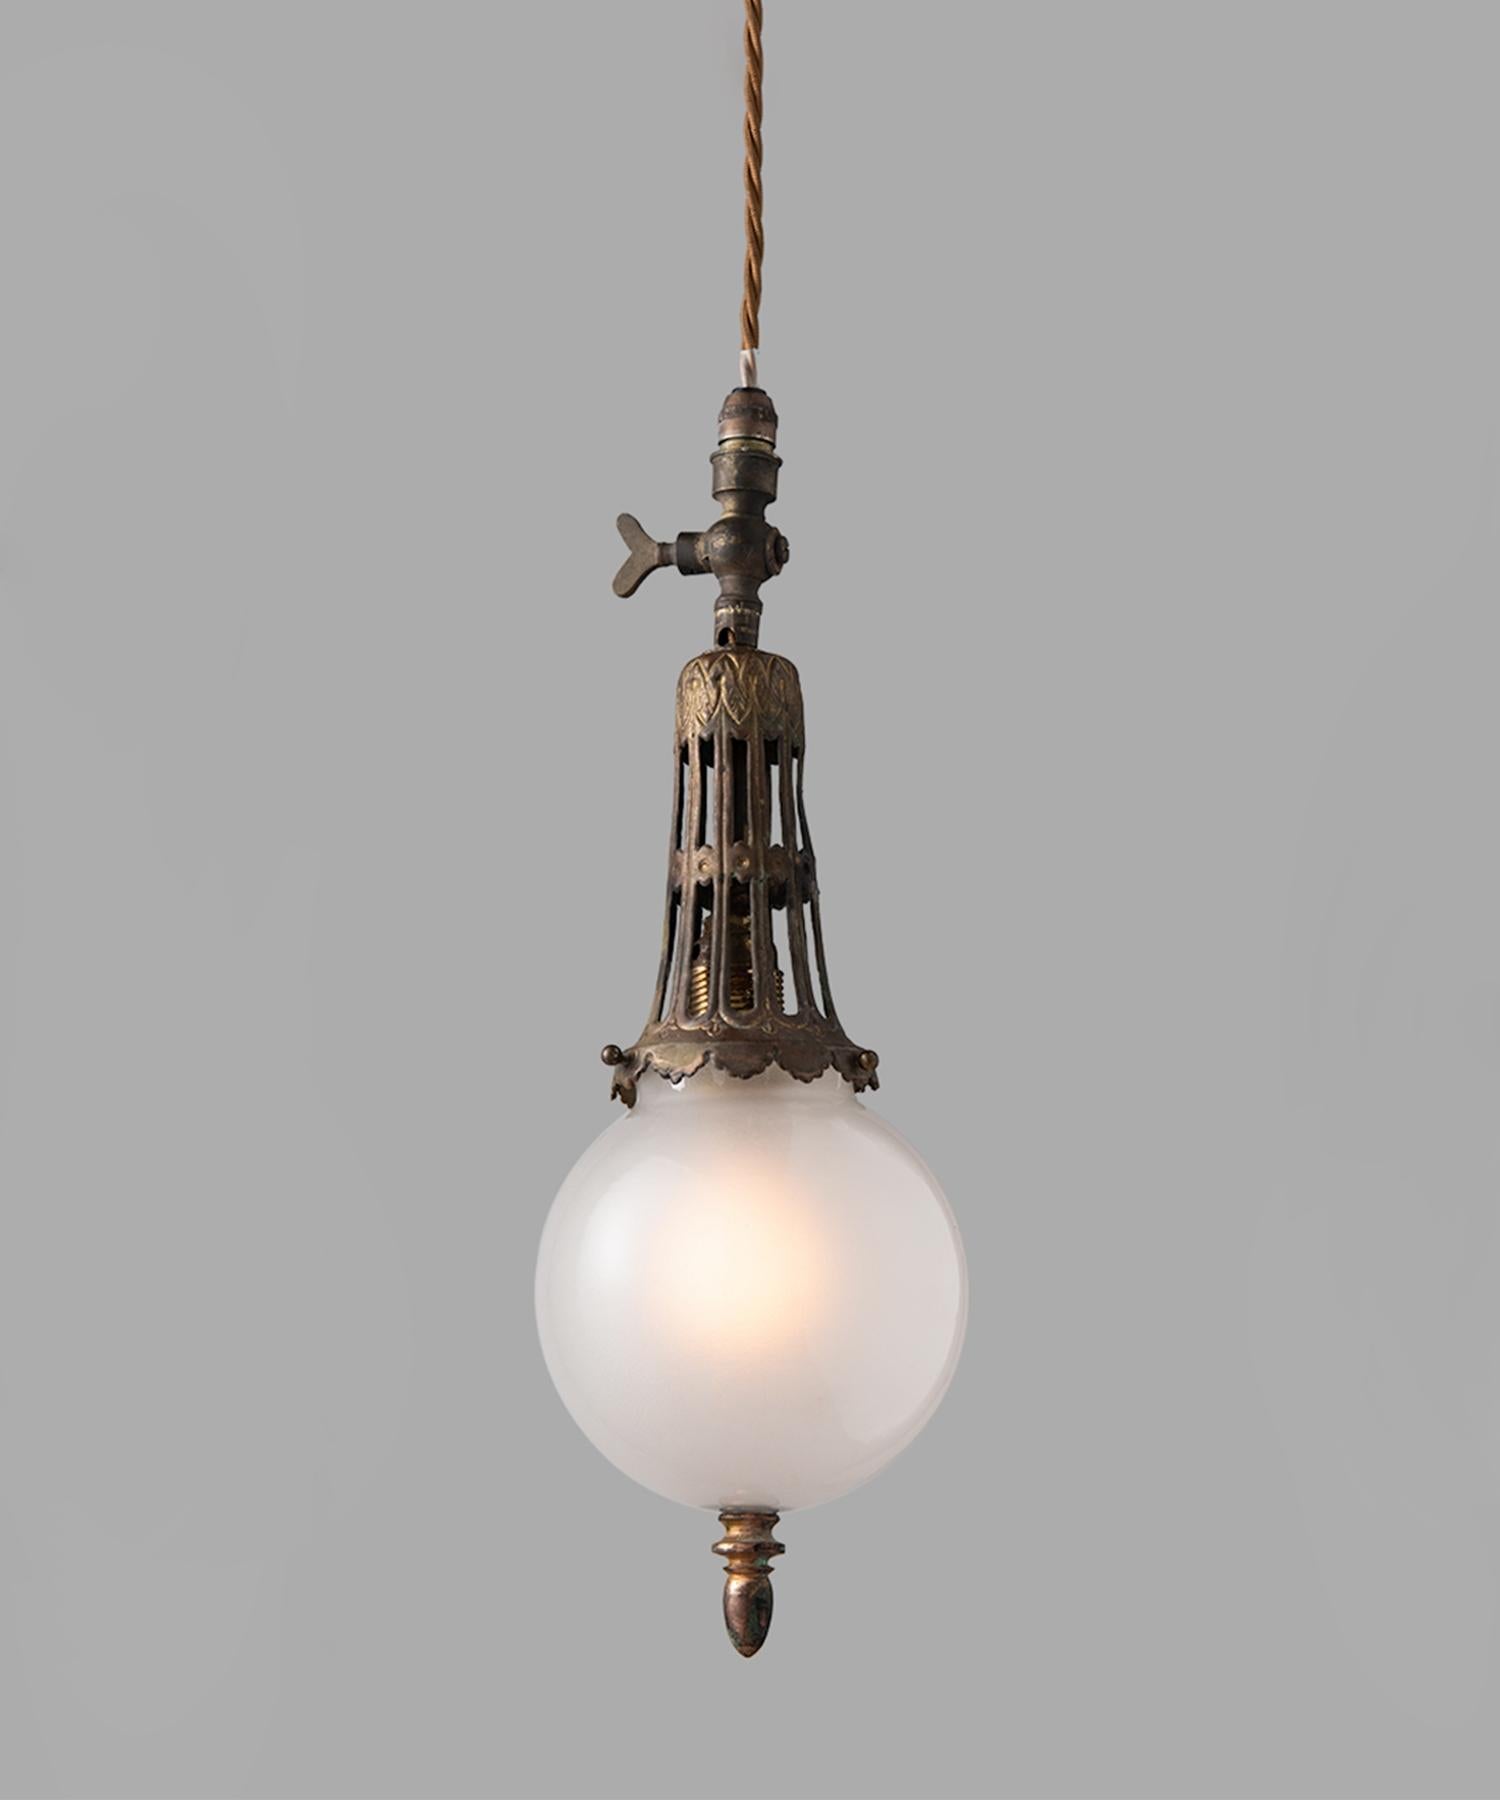 Art Nouveau gas lamp pendants, England, circa 1890.

Petite pendant with ornate brass fitter and switch, with translucent opaline glass shade.

Measures: 4.25” diameter x 14.5” height (adjustable drop).